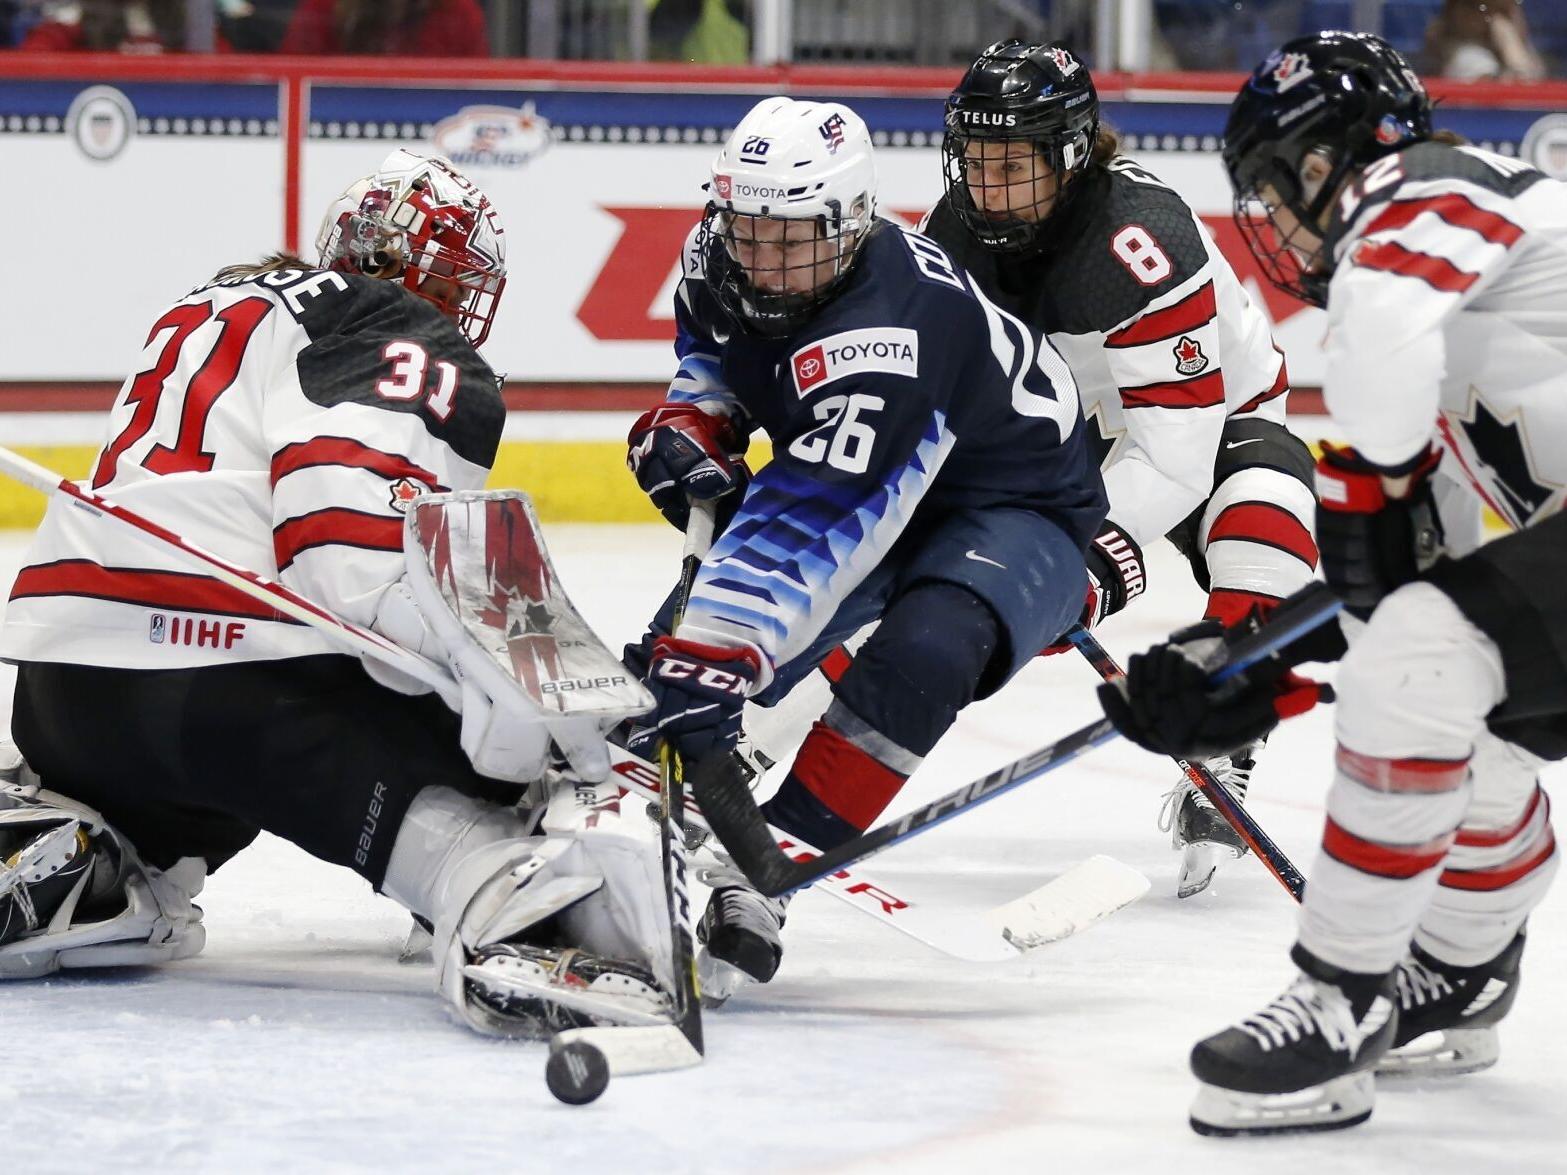 Overcoming century-old obstacles to grow the game | Women's Hockey Life